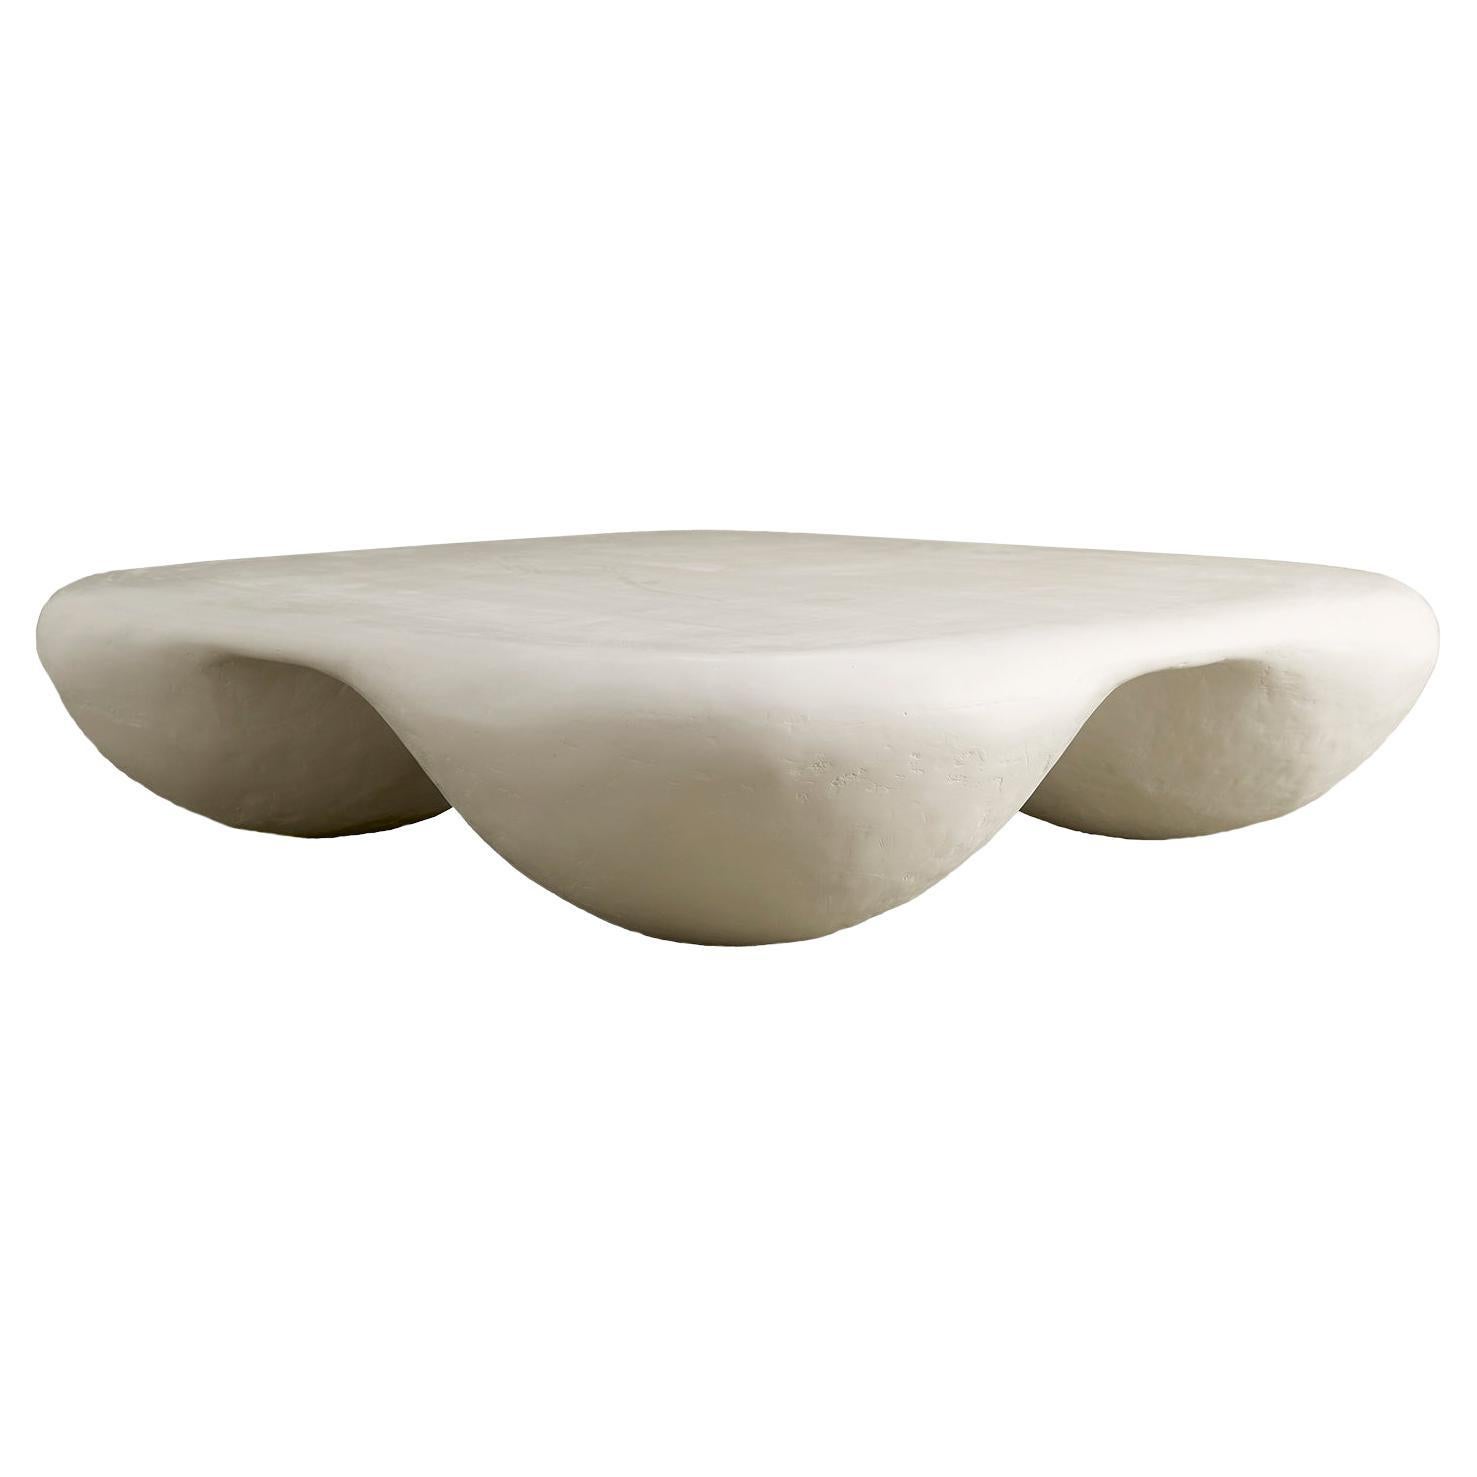 Rounded Square Quad V2 Coffee Table in Natural White Gypsum by Mike Ruiz Serra